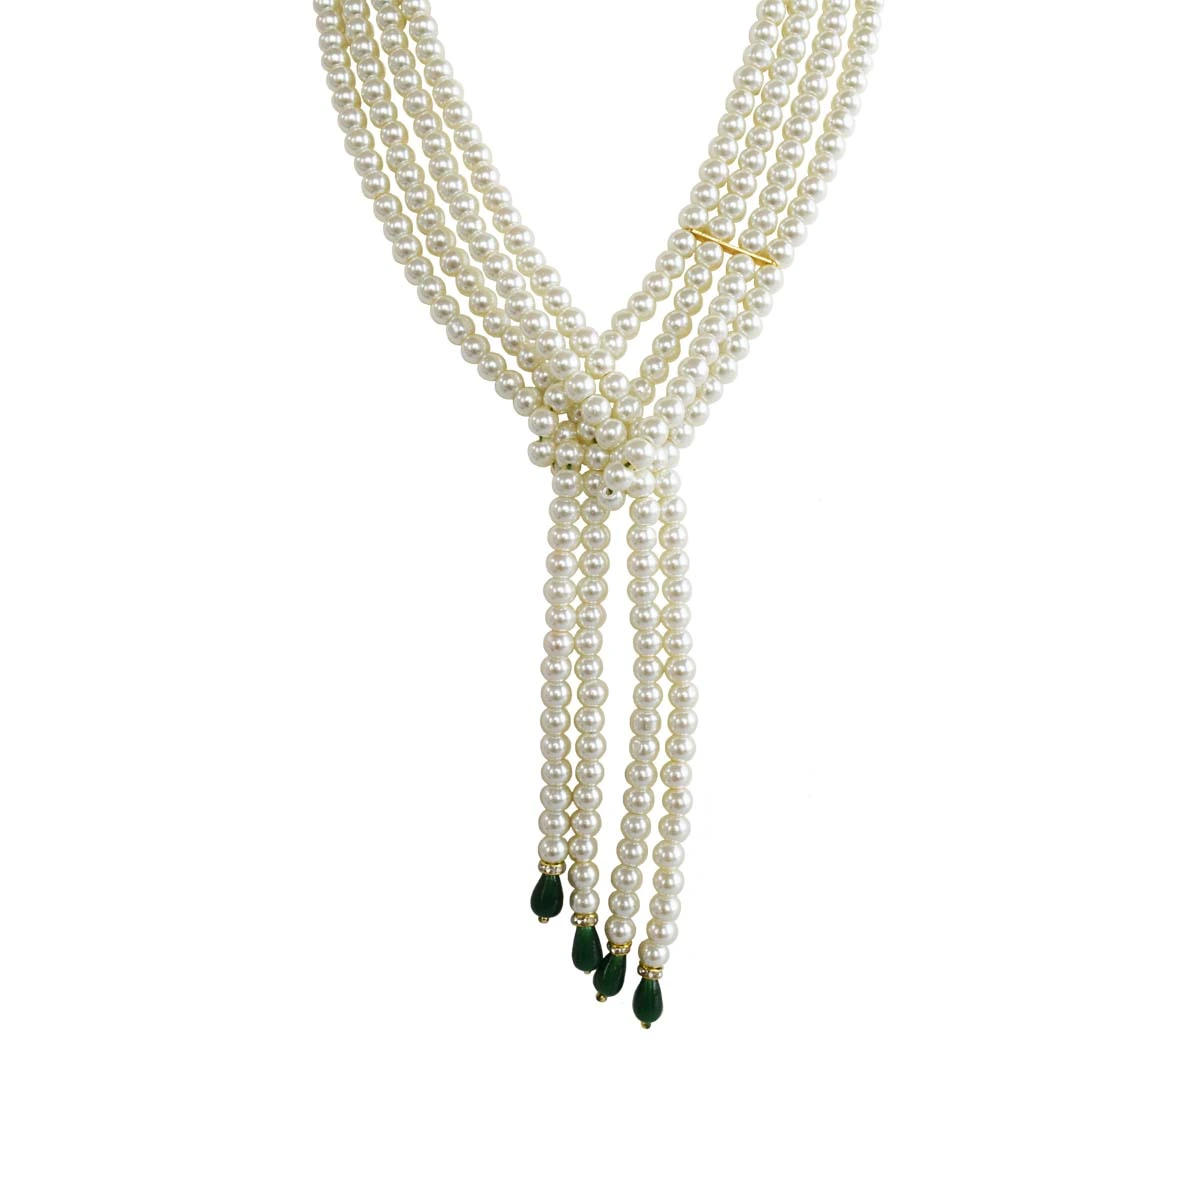 Layered Wrap Around White Shell Pearl Necklace with Green Drop for Women (PS571)